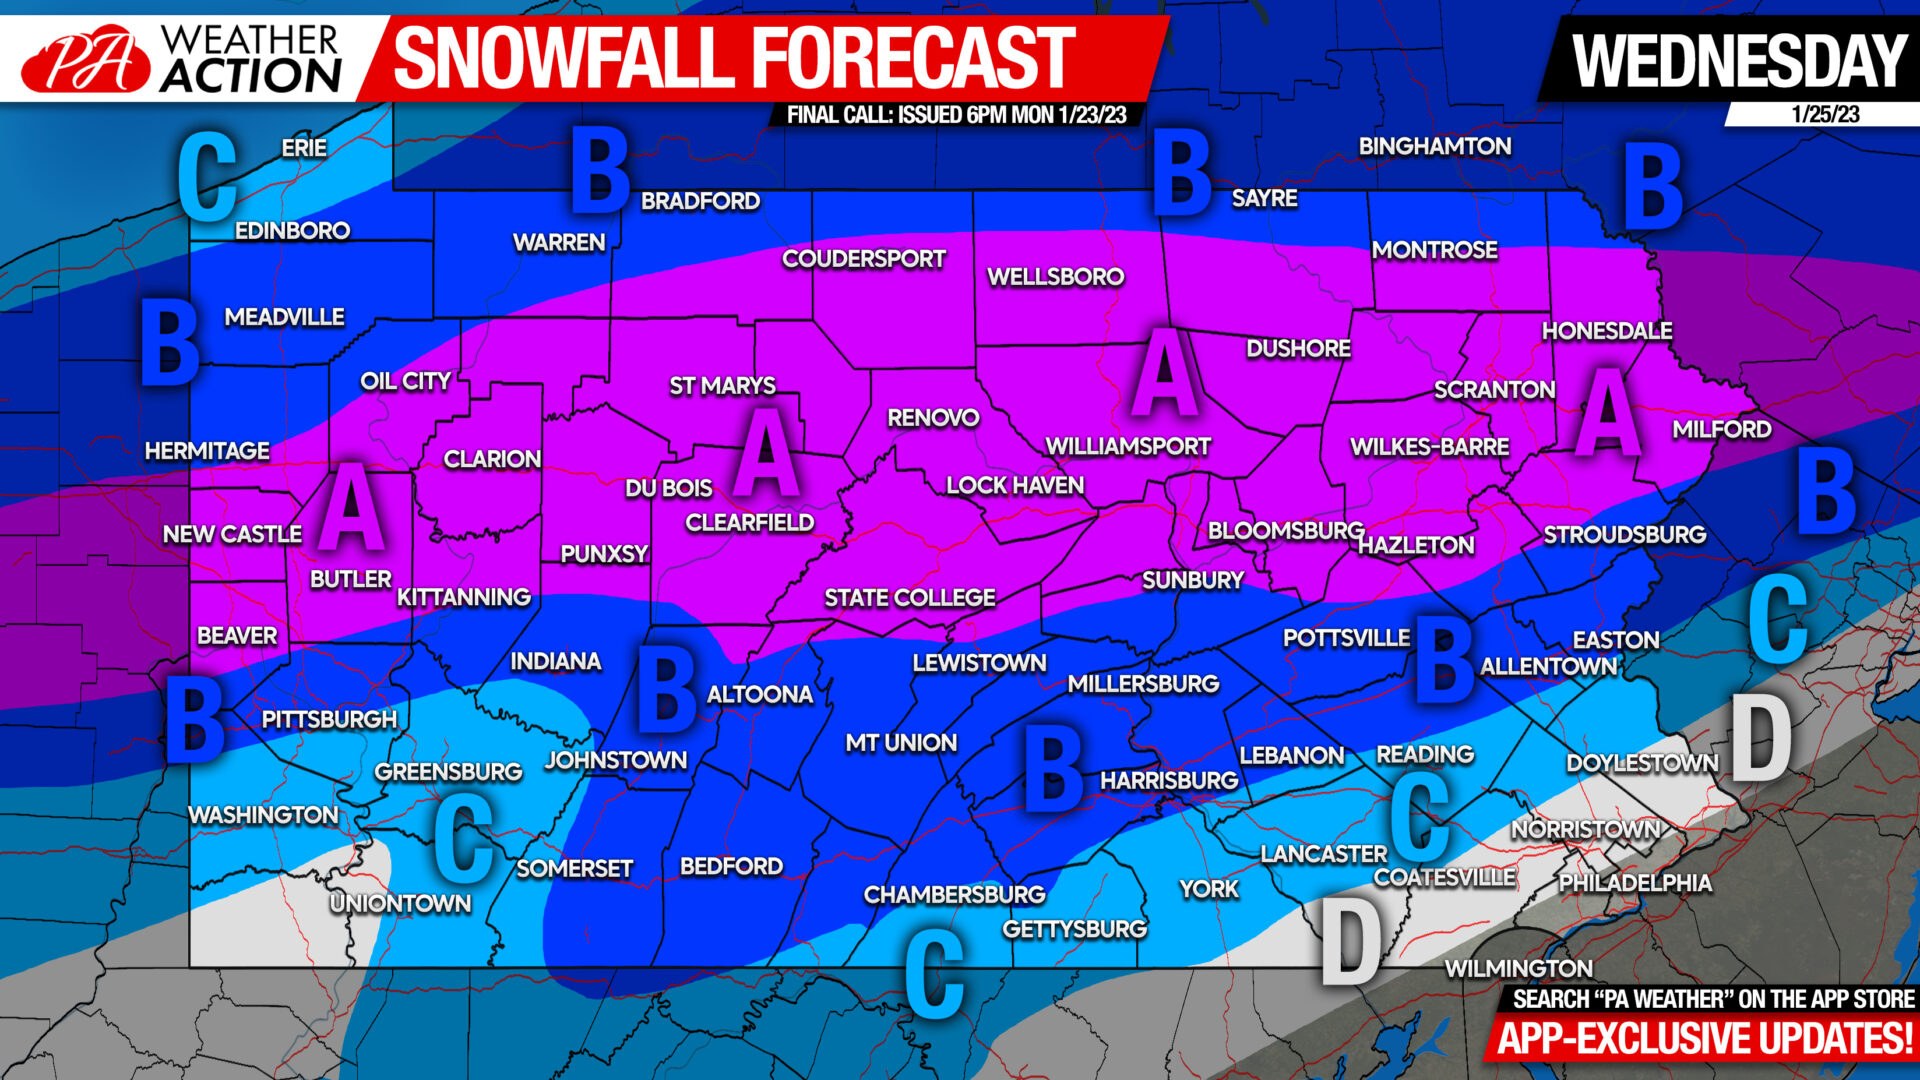 First Call Snowfall Forecast for Wednesday’s Winter Storm